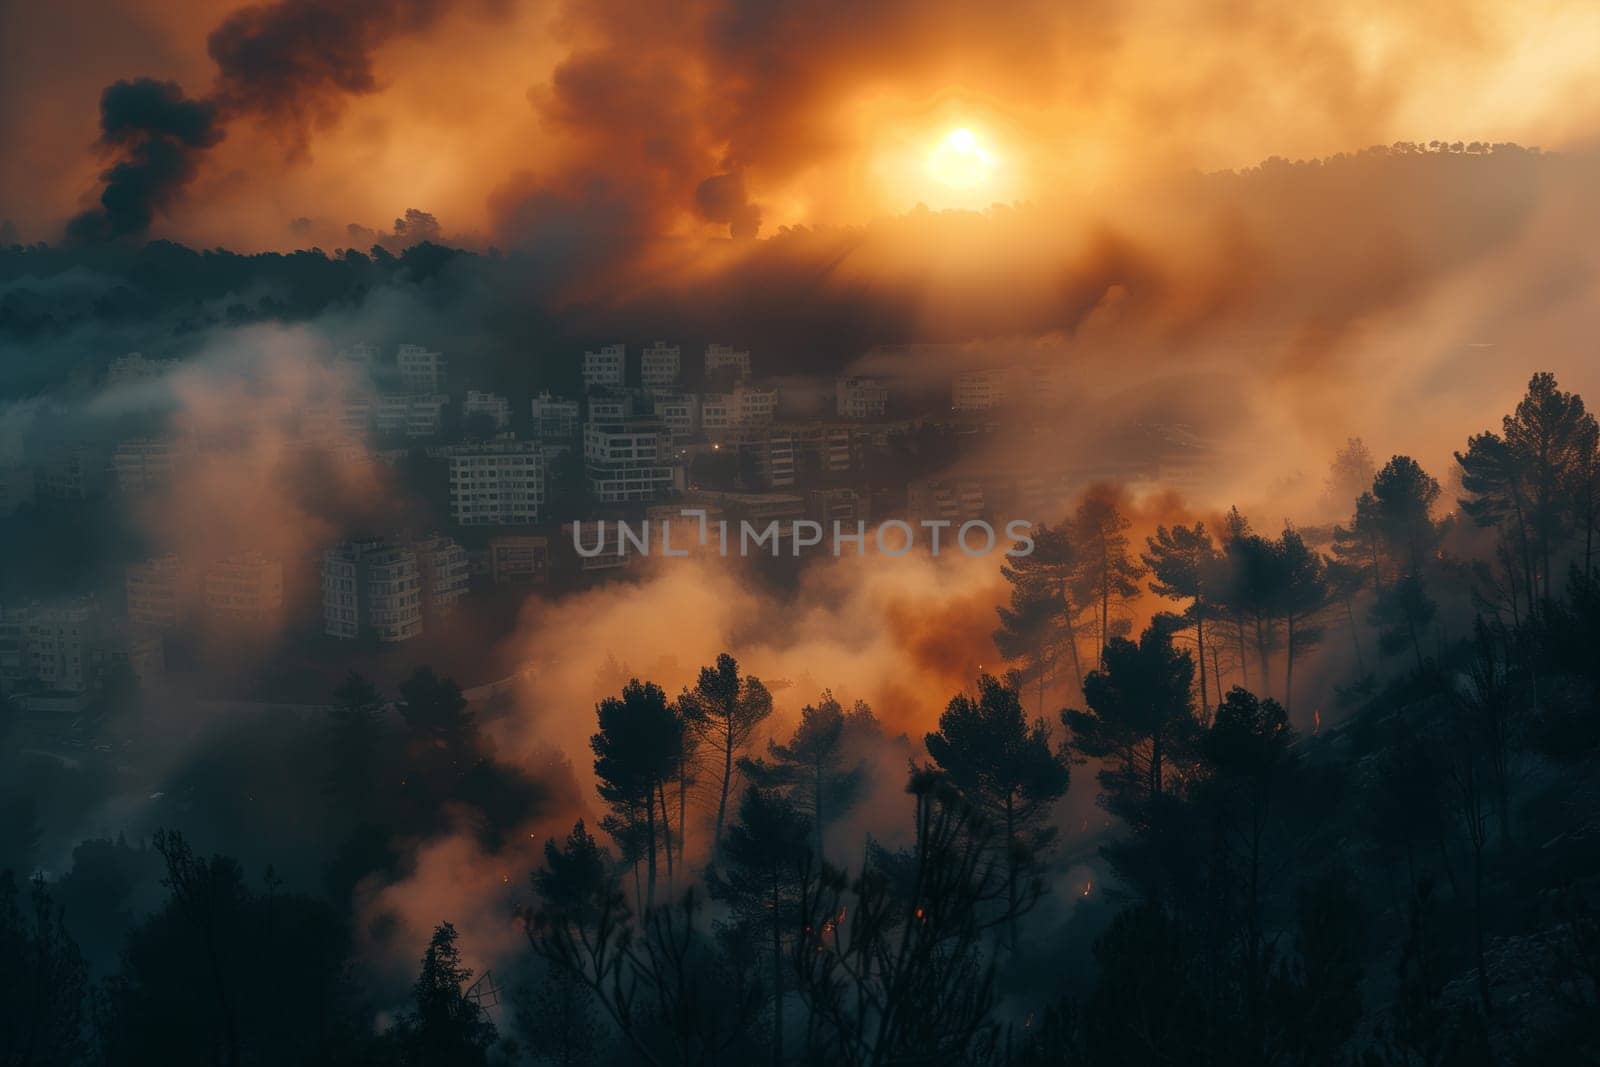 Fire in the forest during a drought, the city is covered in smoke by Sd28DimoN_1976